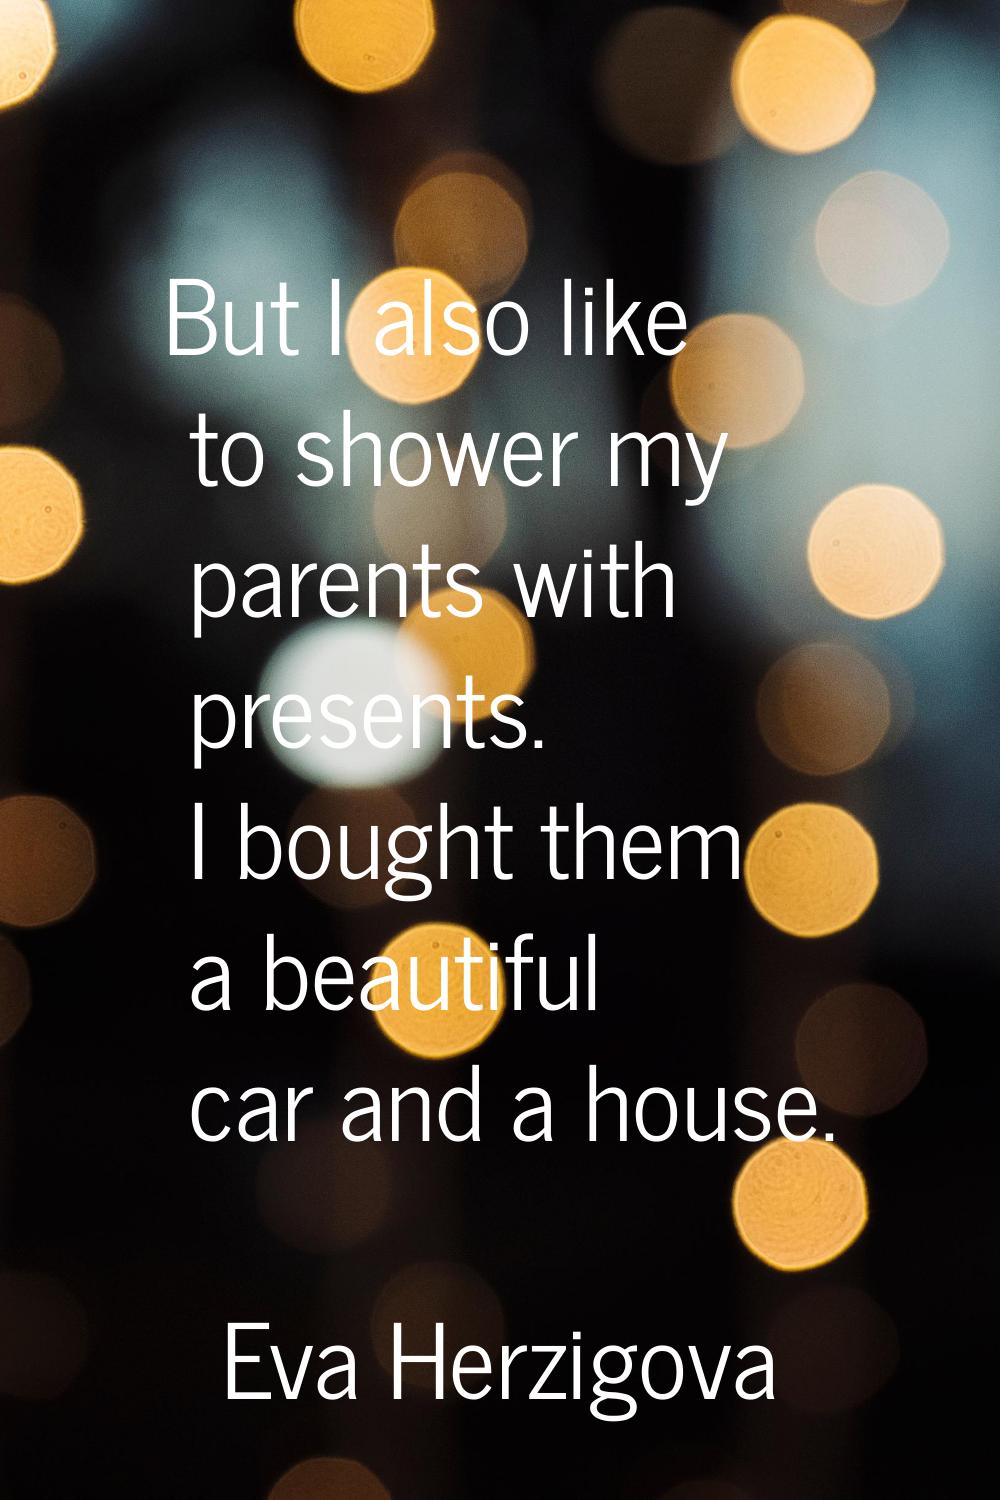 But I also like to shower my parents with presents. I bought them a beautiful car and a house.